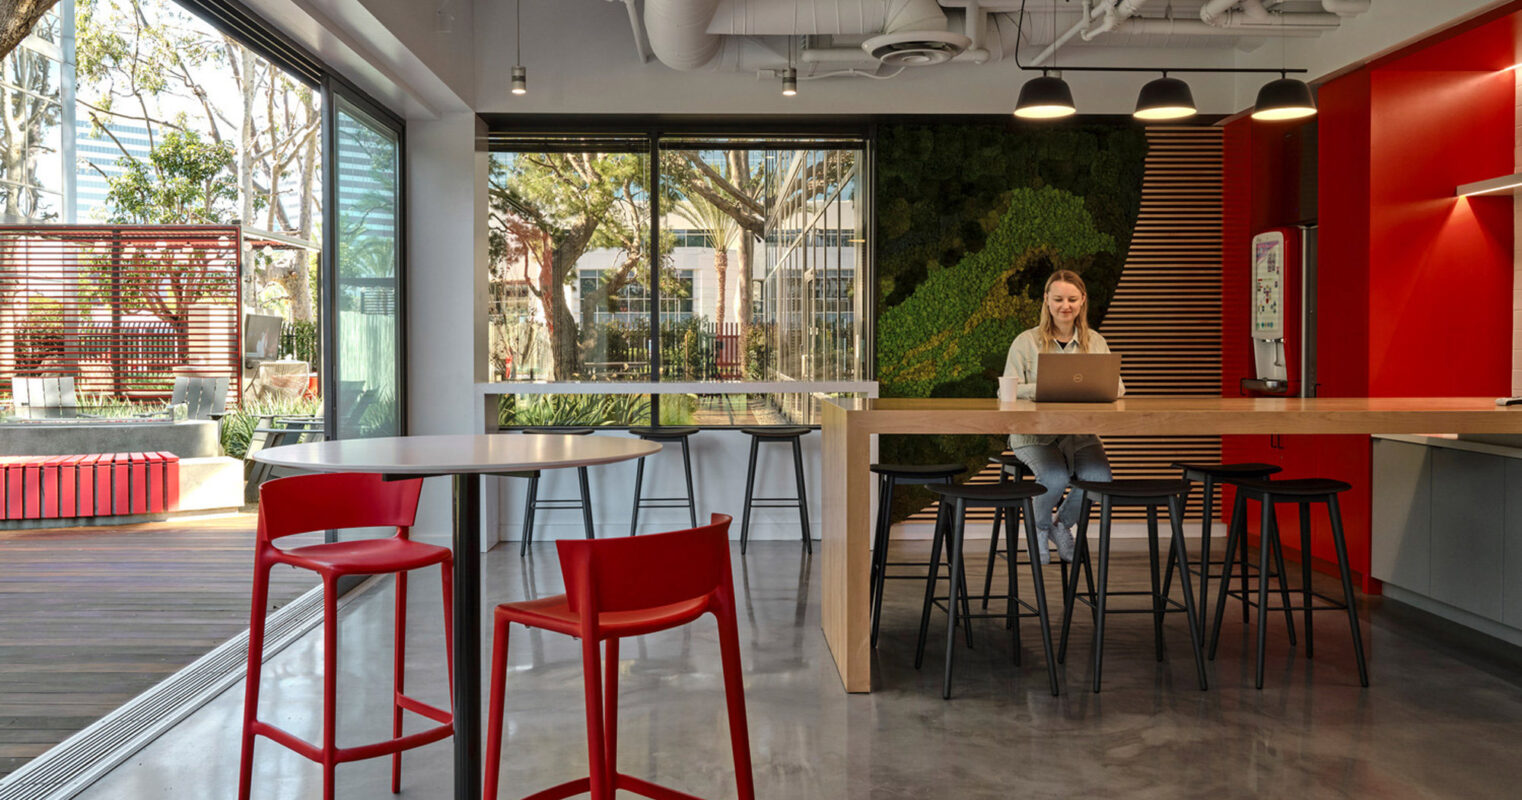 Modern open-plan office with polished concrete floors, featuring a kitchenette with red accents and bar-style seating. Ample natural light filters through floor-to-ceiling windows, complemented by a lush vertical garden and exposed ductwork for an industrial chic aesthetic.